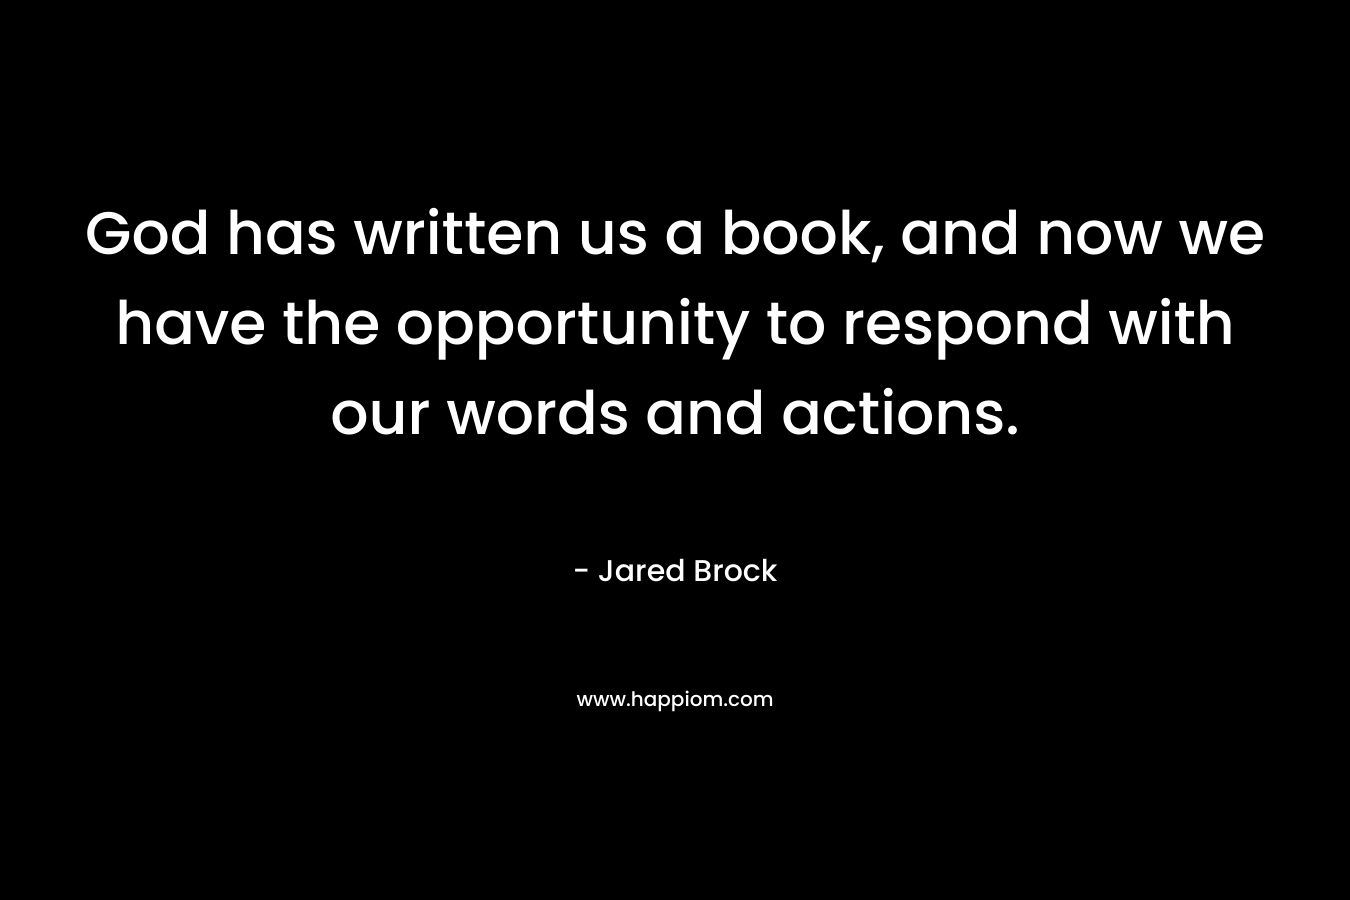 God has written us a book, and now we have the opportunity to respond with our words and actions. – Jared Brock